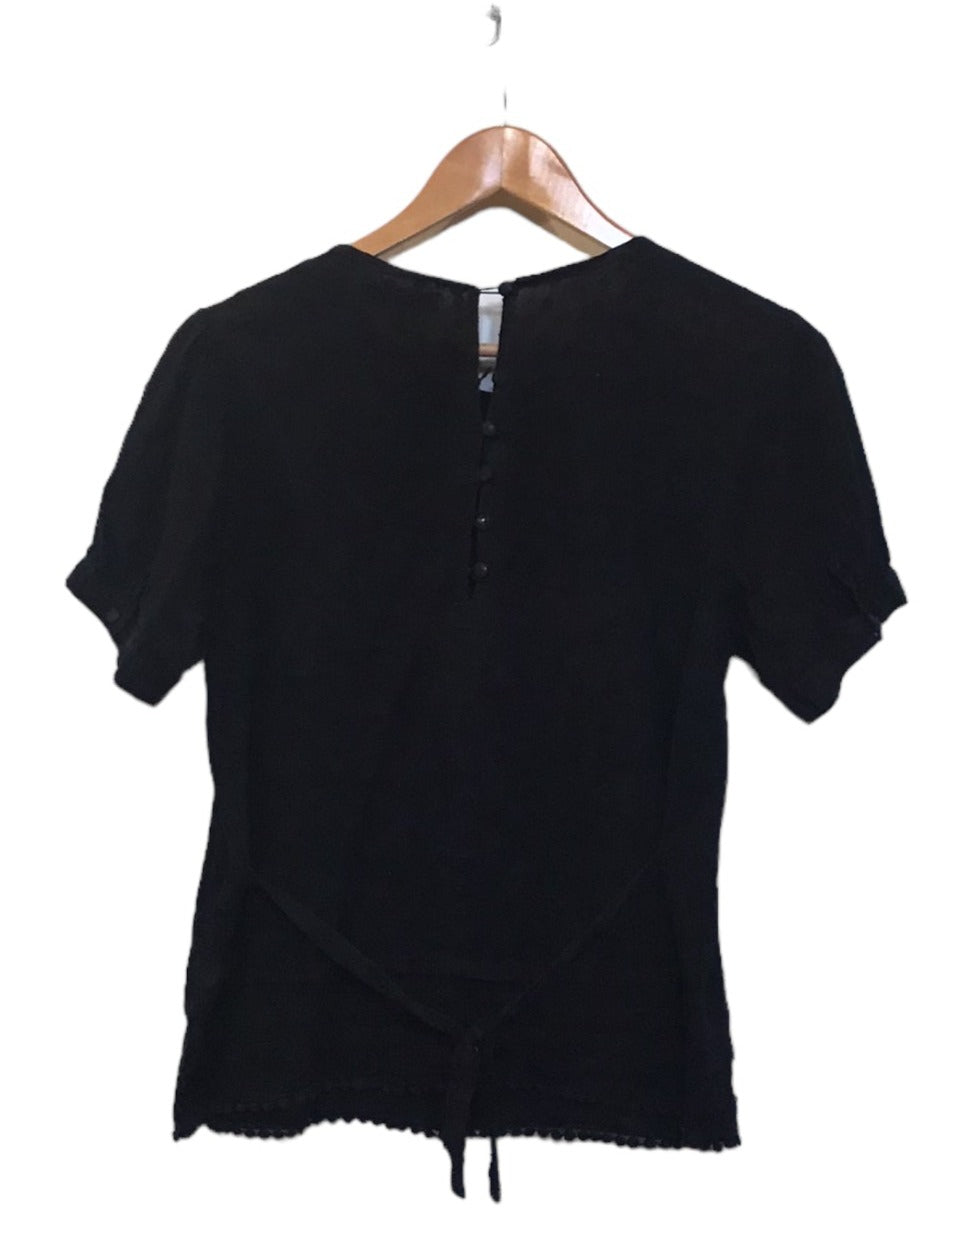 New York Laundry Top (Size L)